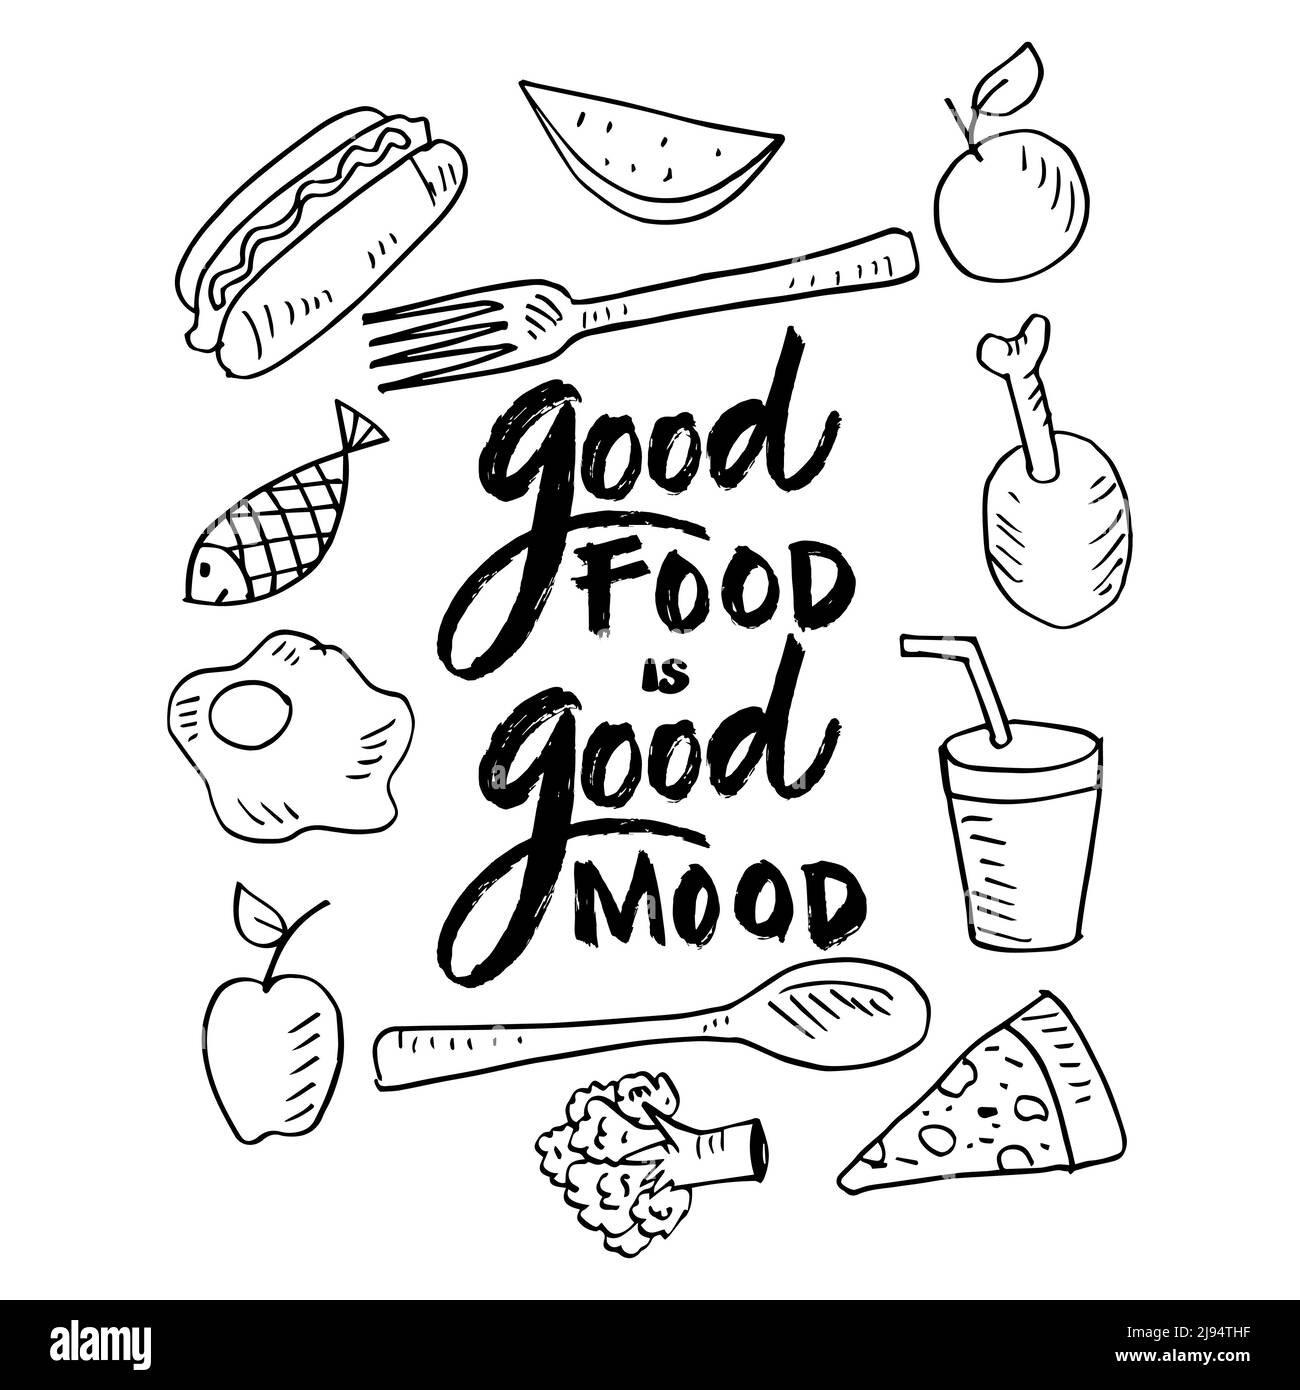 Good food is good mood. Poster quotes. Stock Photo